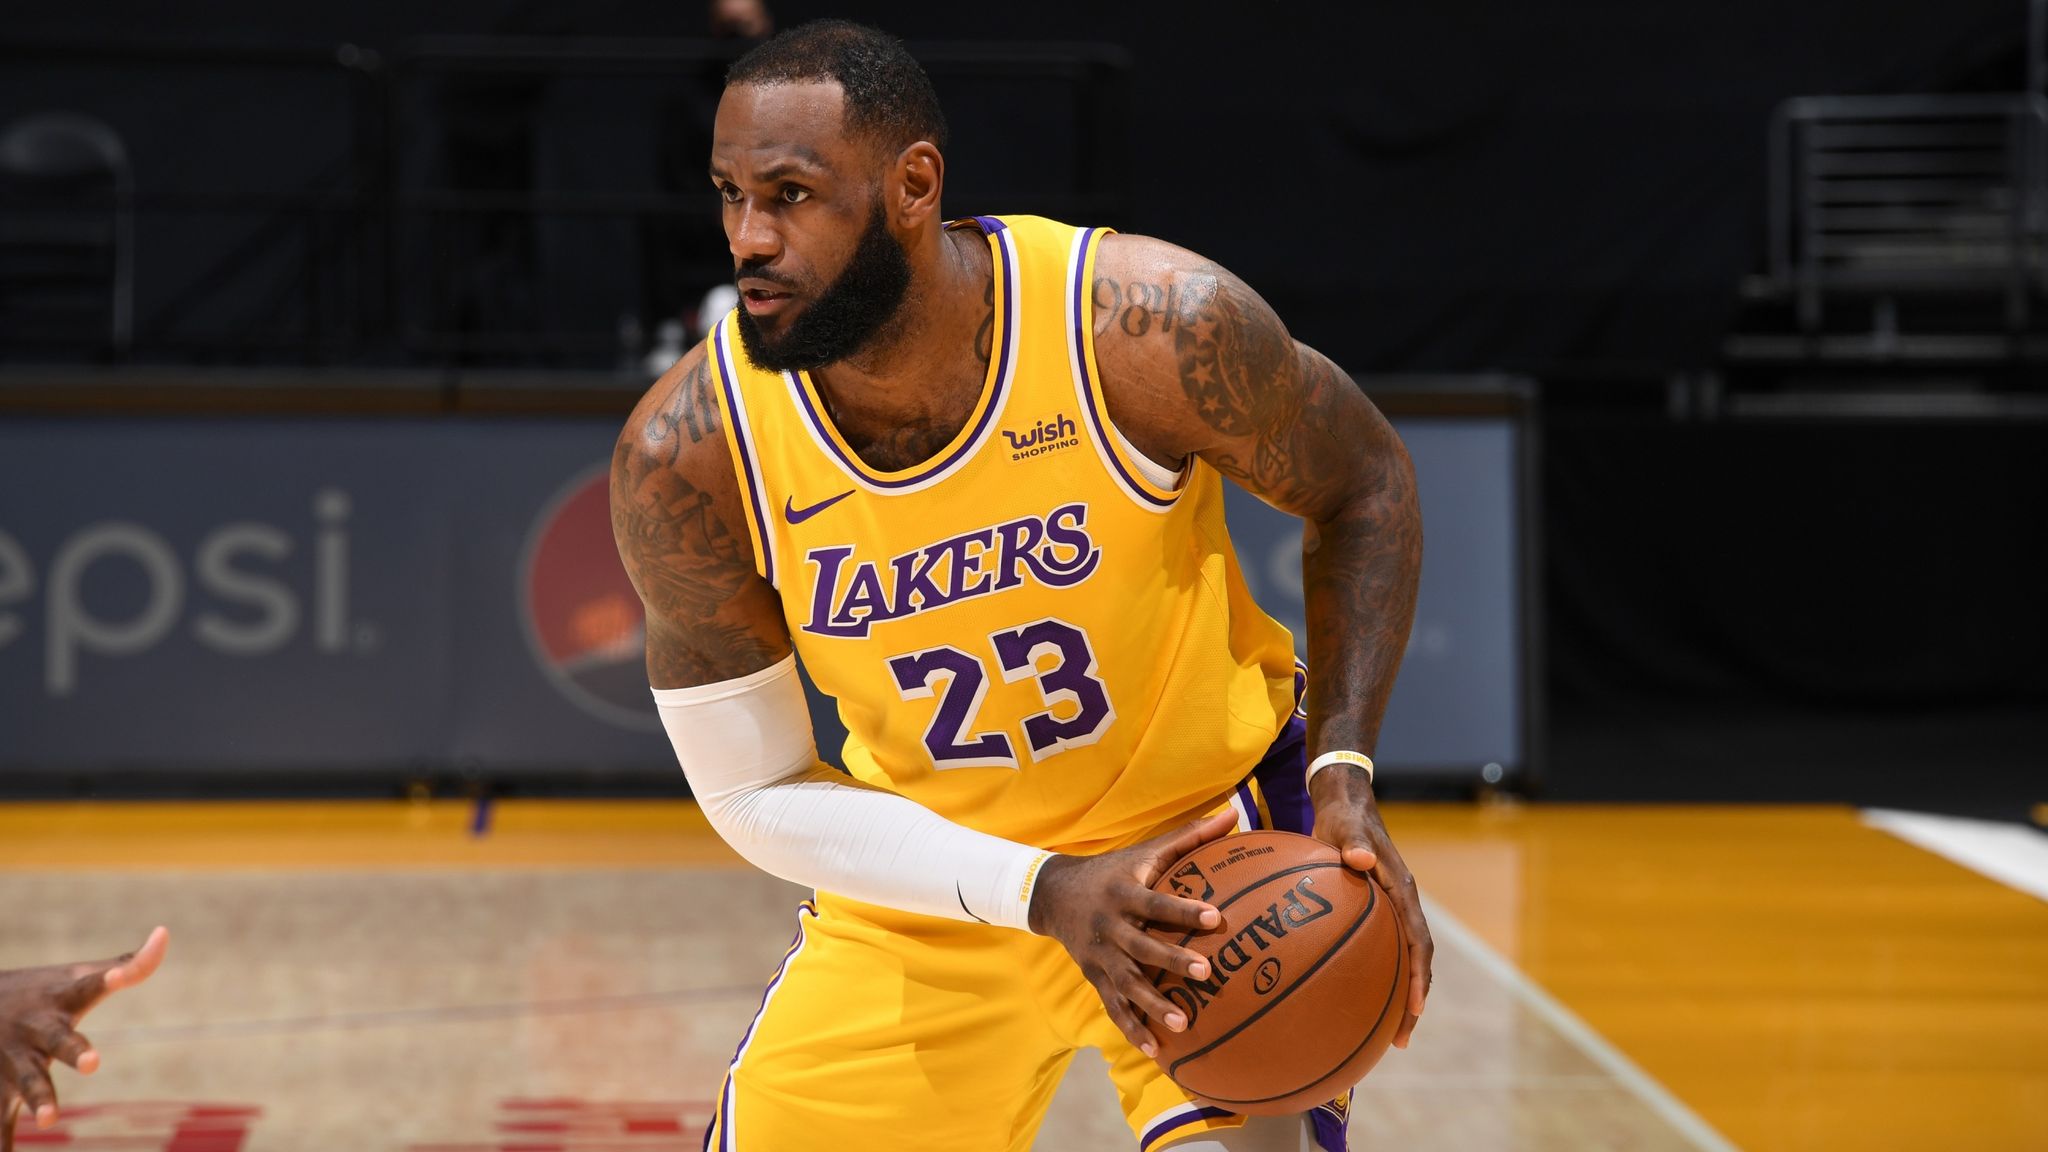 LeBron James' Los Angeles Lakers jersey most popular for second